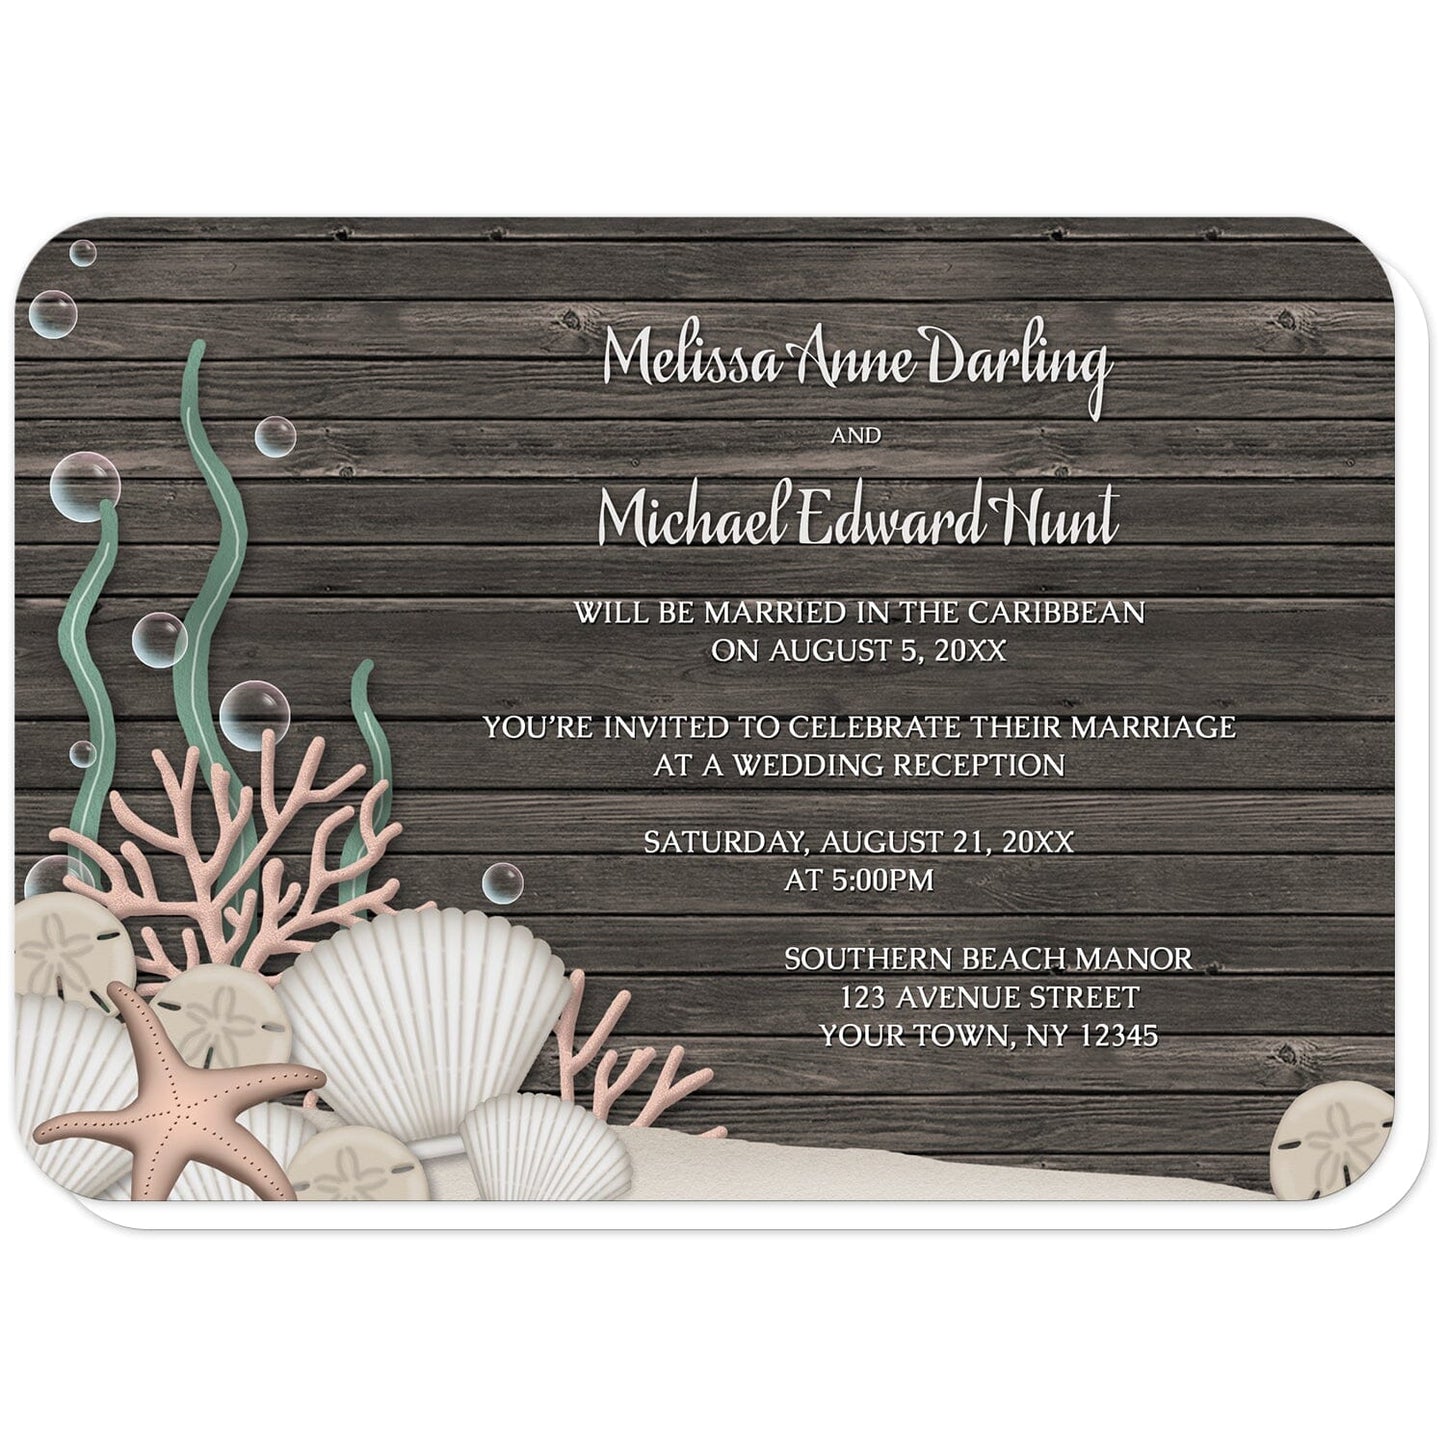 Rustic Beach Seashells and Wood Reception Only Invitations (with rounded corners) at Artistically Invited. Rustic beach seashells and wood reception only invitations with a rustic "on the beach" or "under the sea" theme. They are designed with a dark wood pattern, sandy seabed, assorted seashells, coral, and kelp. Your personalized post-wedding reception details are custom printed in white over the wood background.